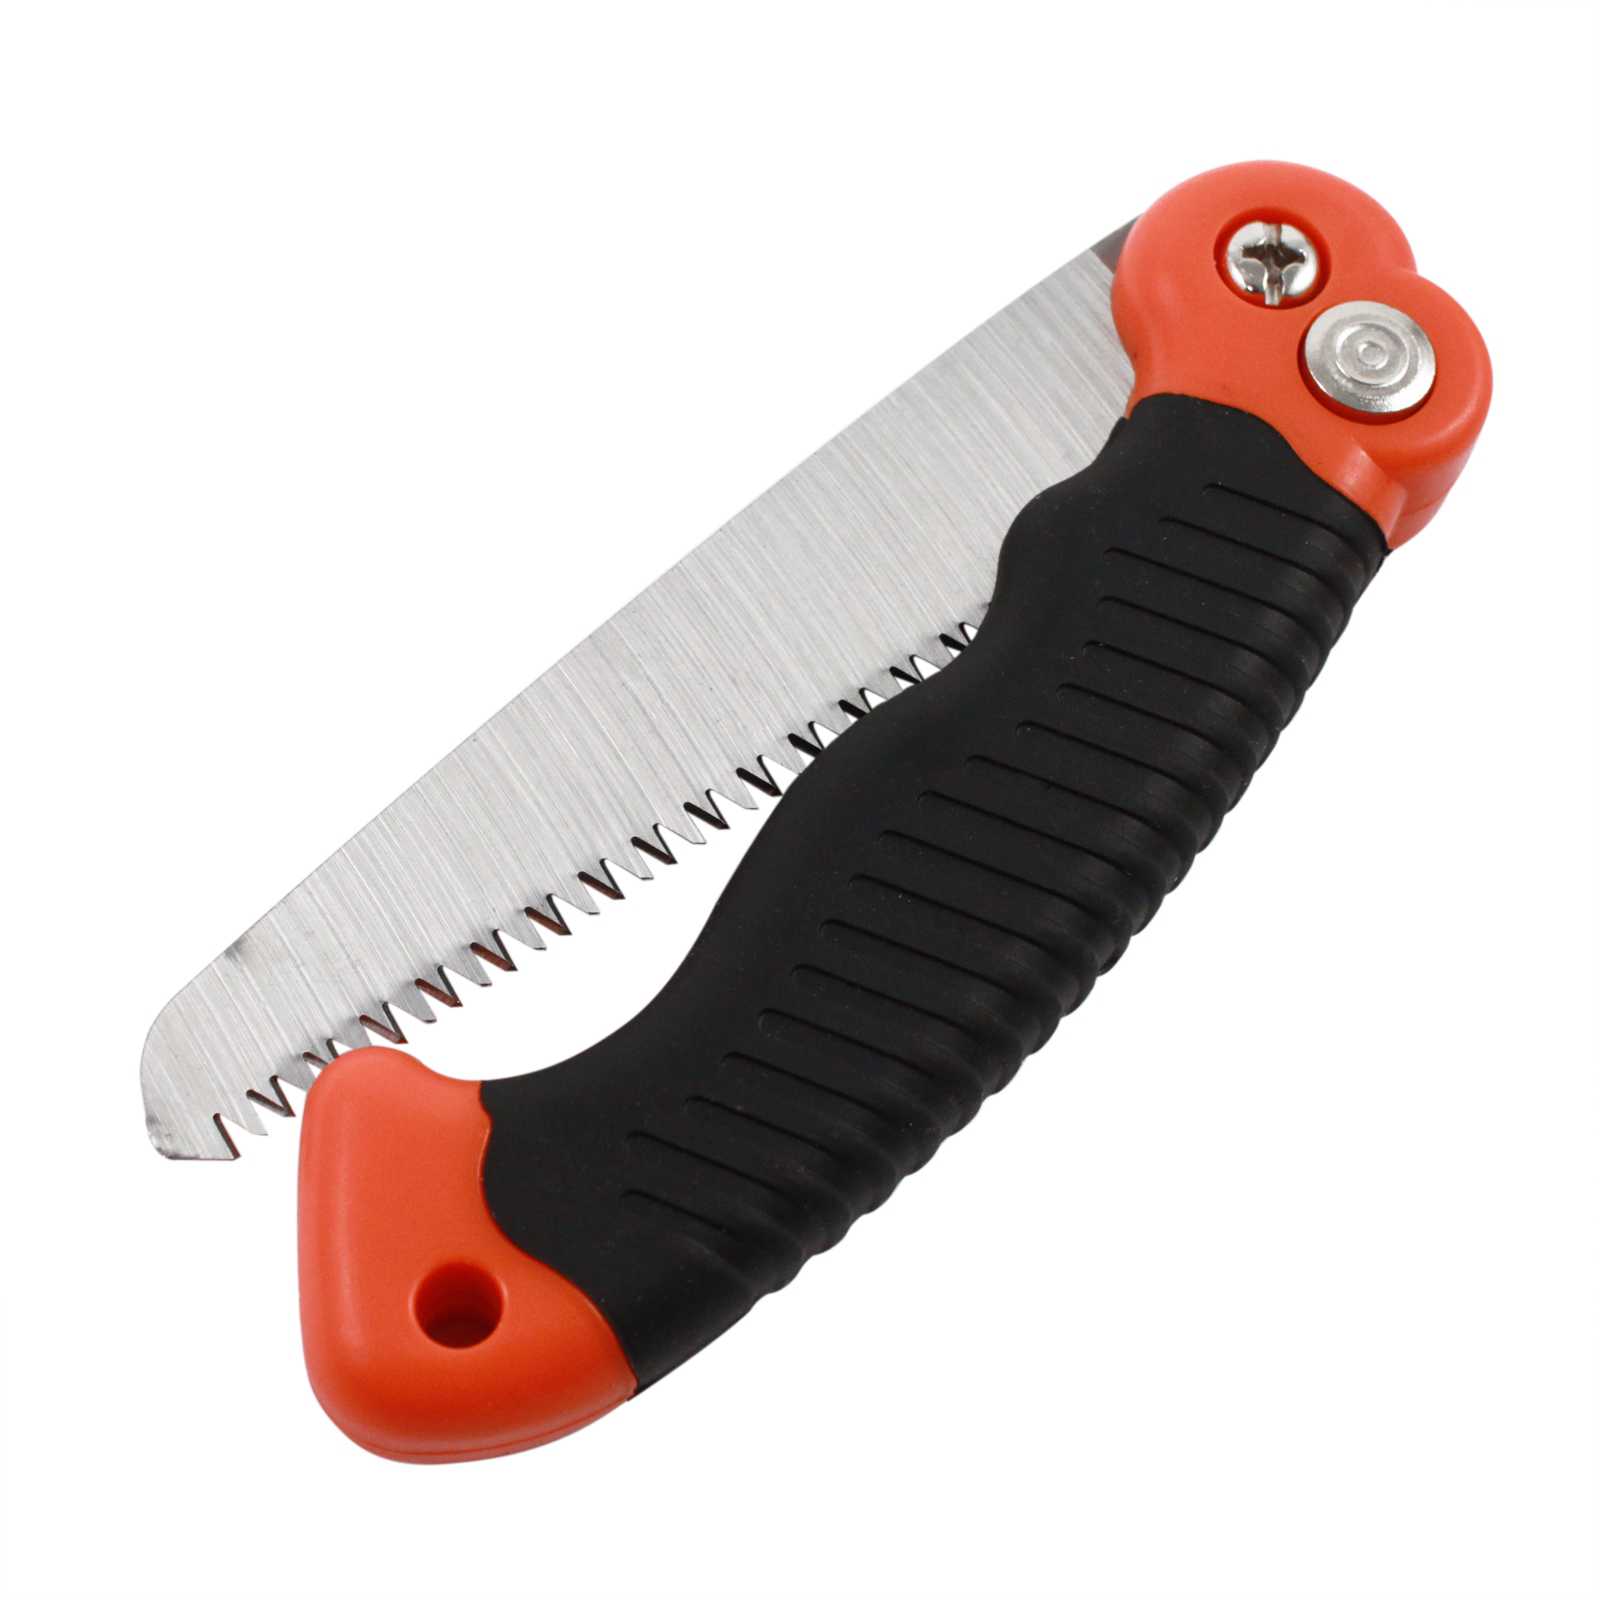 Hand Pruning Saw Gardening Tool For Home Outdoor Plants